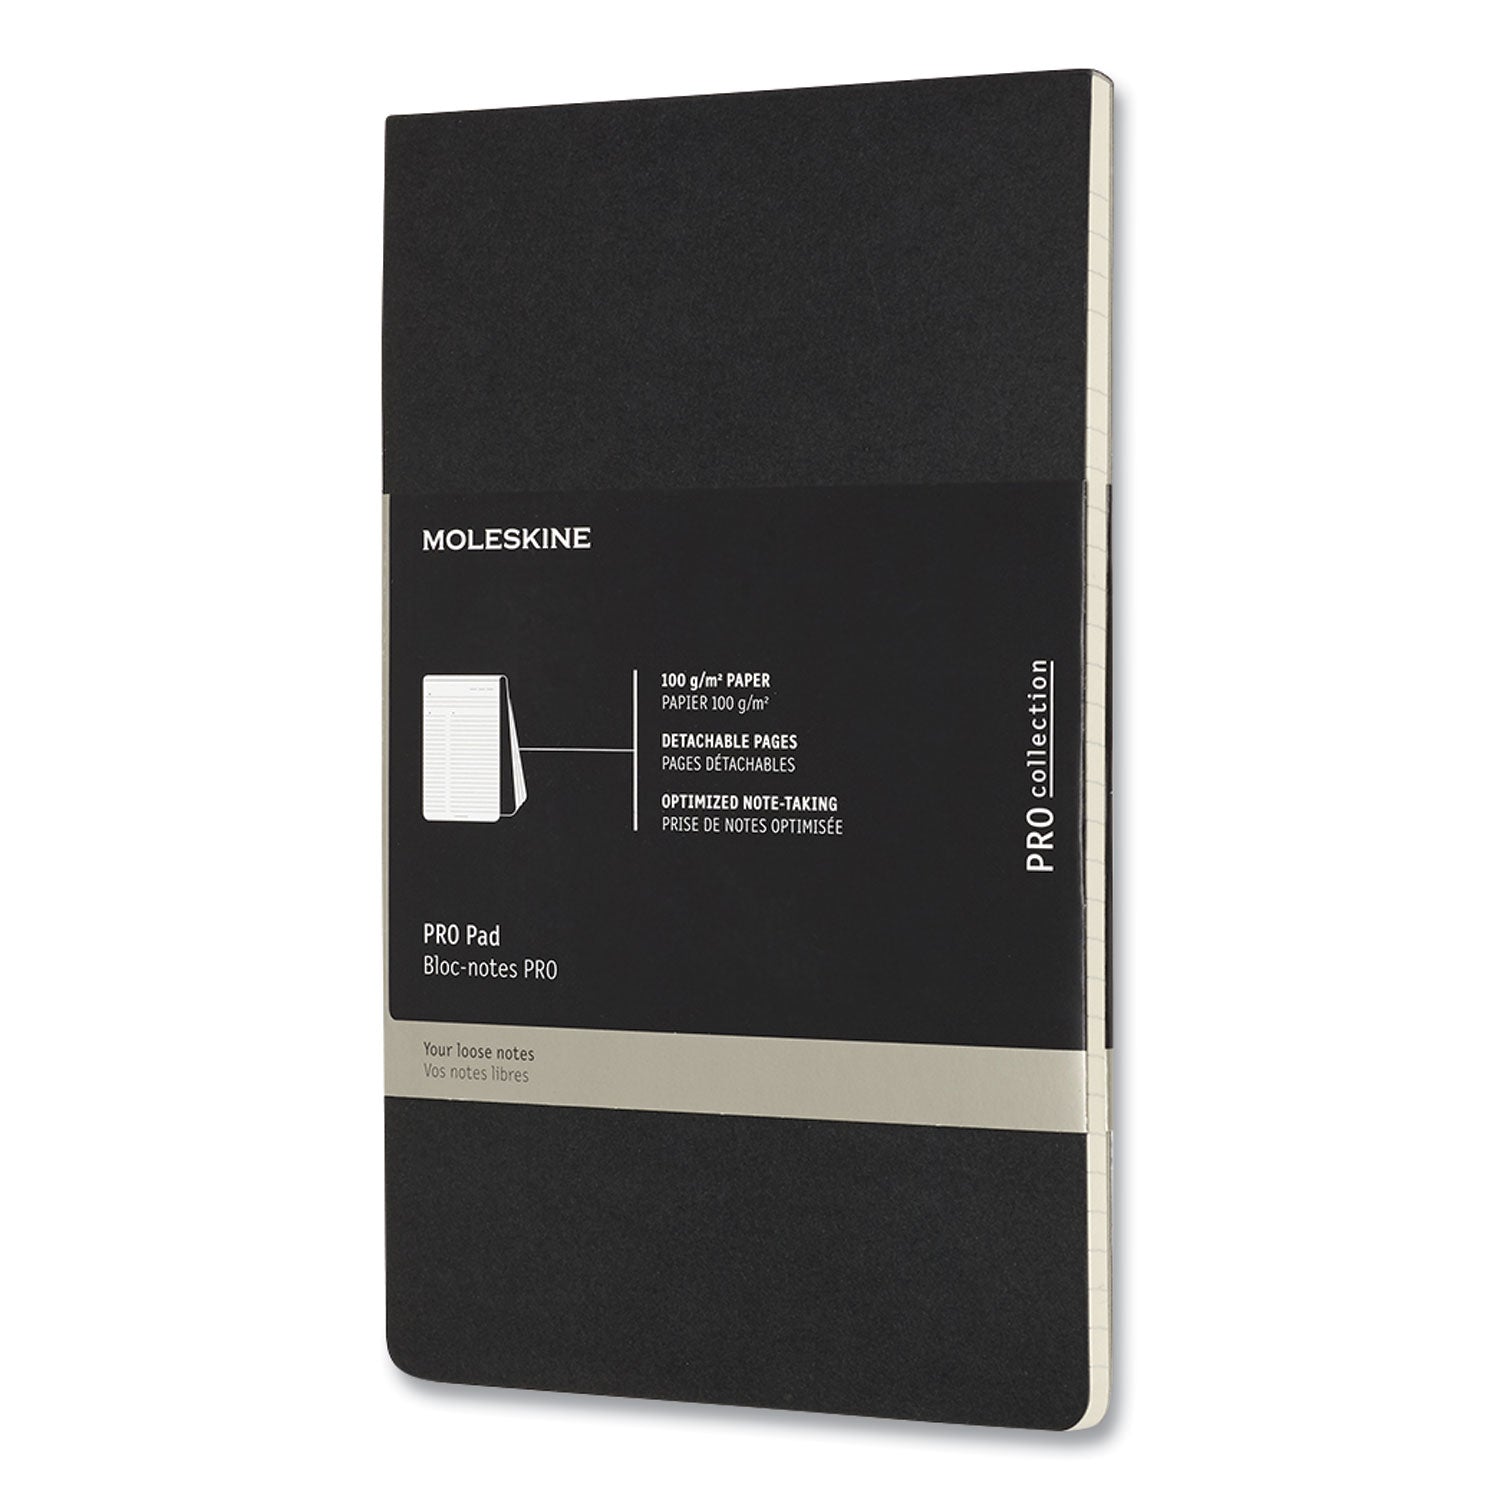 pro-pad-meeting-minutes-notes-format-black-cover-96-ivory-5-x-825-sheets_hbg620916 - 1